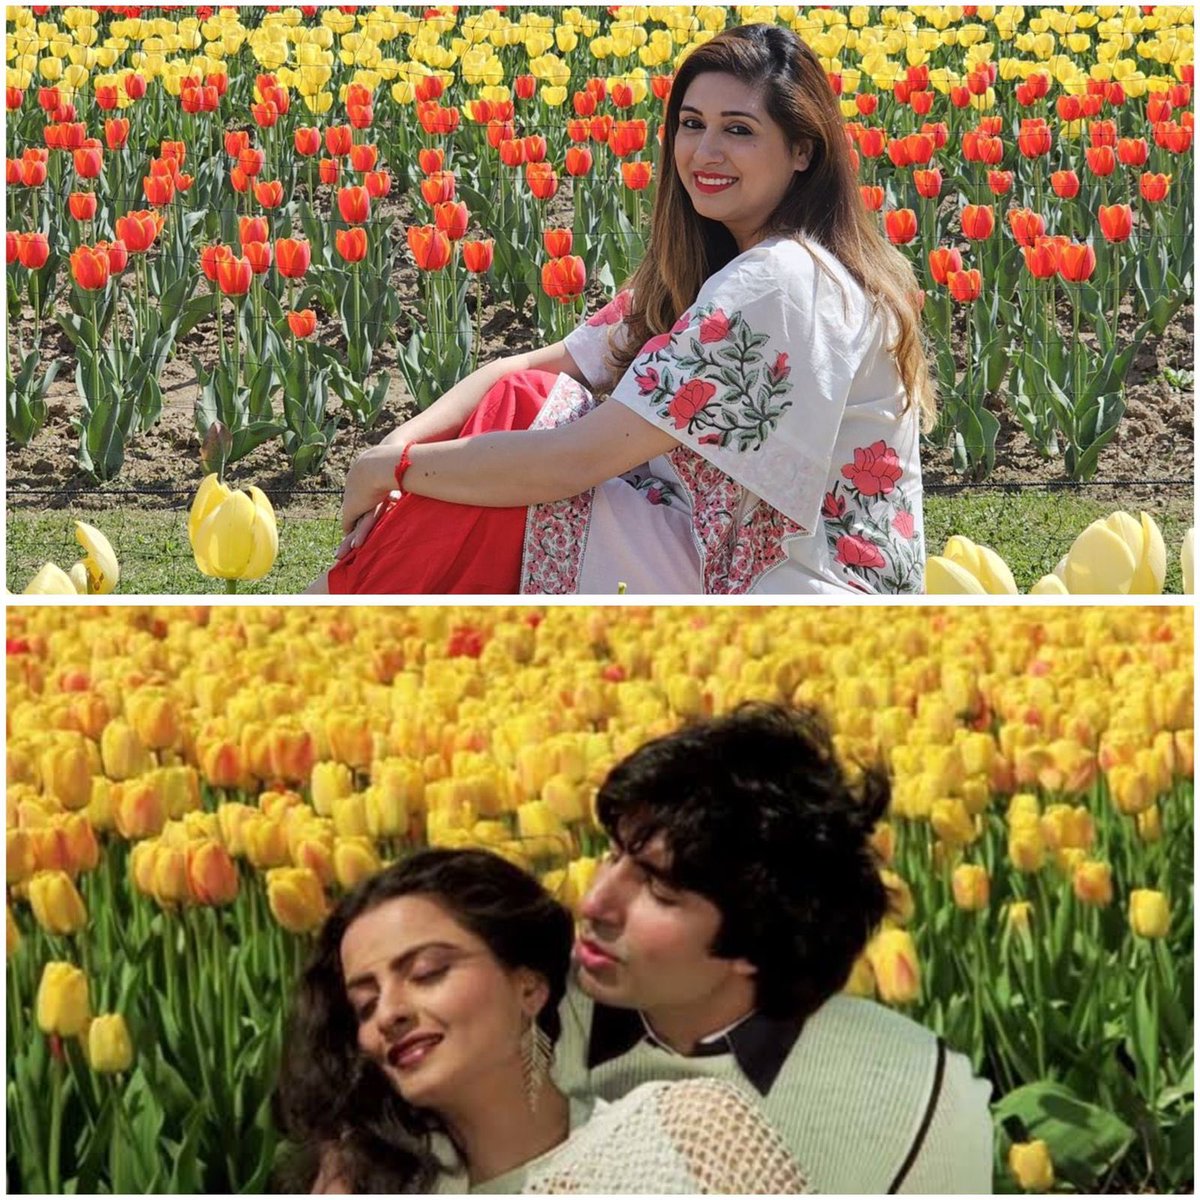 @vahbz on her Kashmir trip visits the famous Tulip Garden in Srinagar where #AmitabhBachchan and #Rekha ’s song from the film Silsila was filmed 😍

#vahbz #amitabhbachchan #rekha #silsila #FirstIndiaTelly